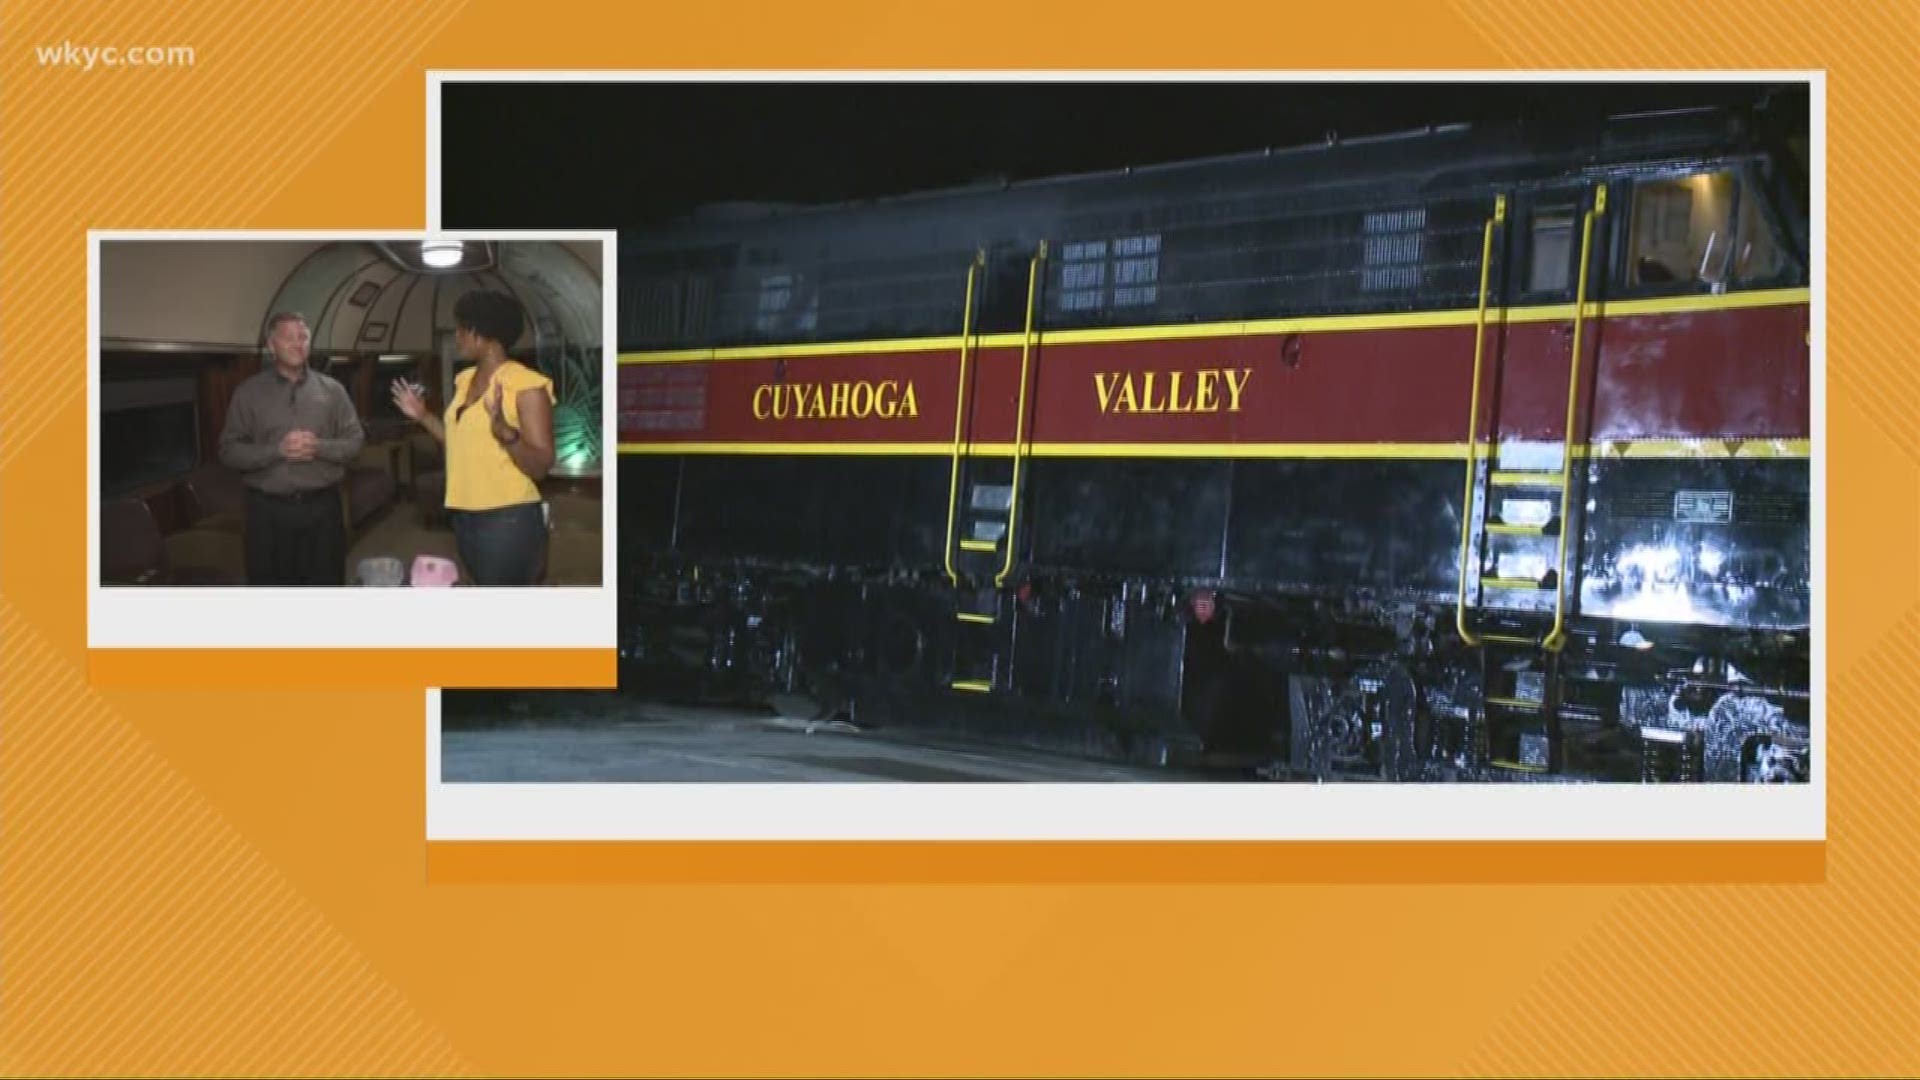 Aug. 6, 2018: WKYC's Tiffany Tarpley gives us a tour of the Cuyahoga Valley Scenic Railroad.